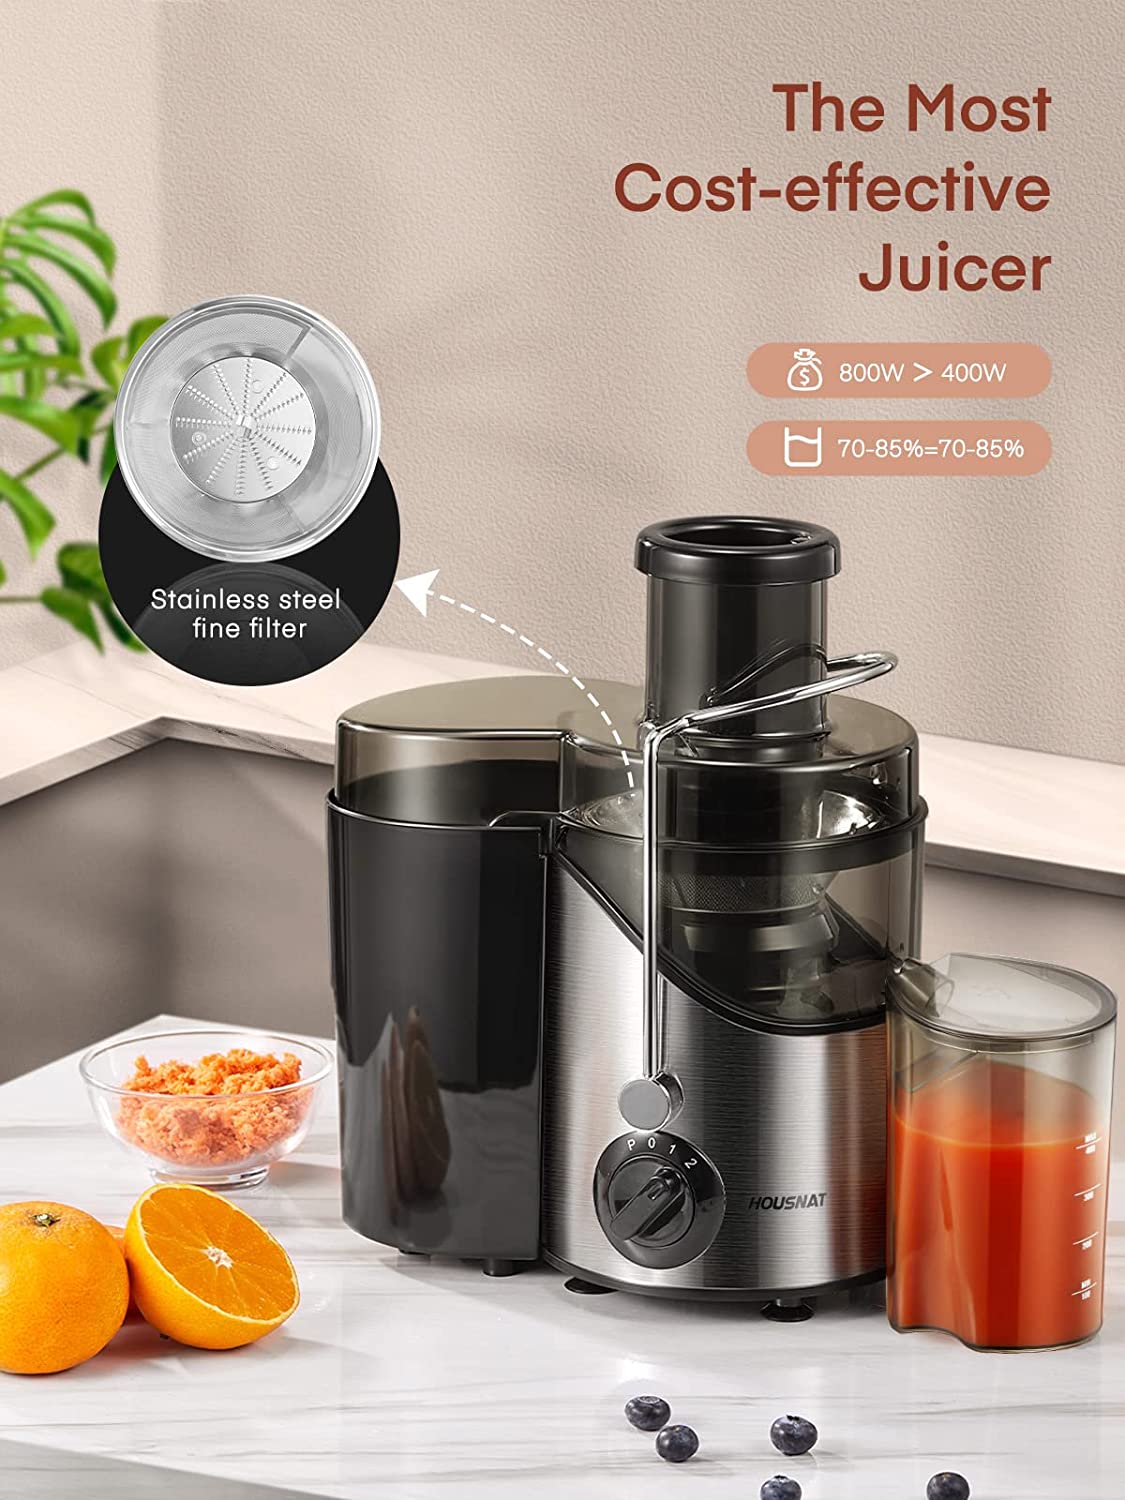 the most cost effective juicer, Juicer Machine, Juicers Easy to Clean, HOUSNAT Centrifugal Extractor Juicer 3 Speeds with Big Mouth 3" Feed Chute, Juicer Extractor for Fruits & Vegs, Electric Juicer with Anti-Slip, BPA-Free